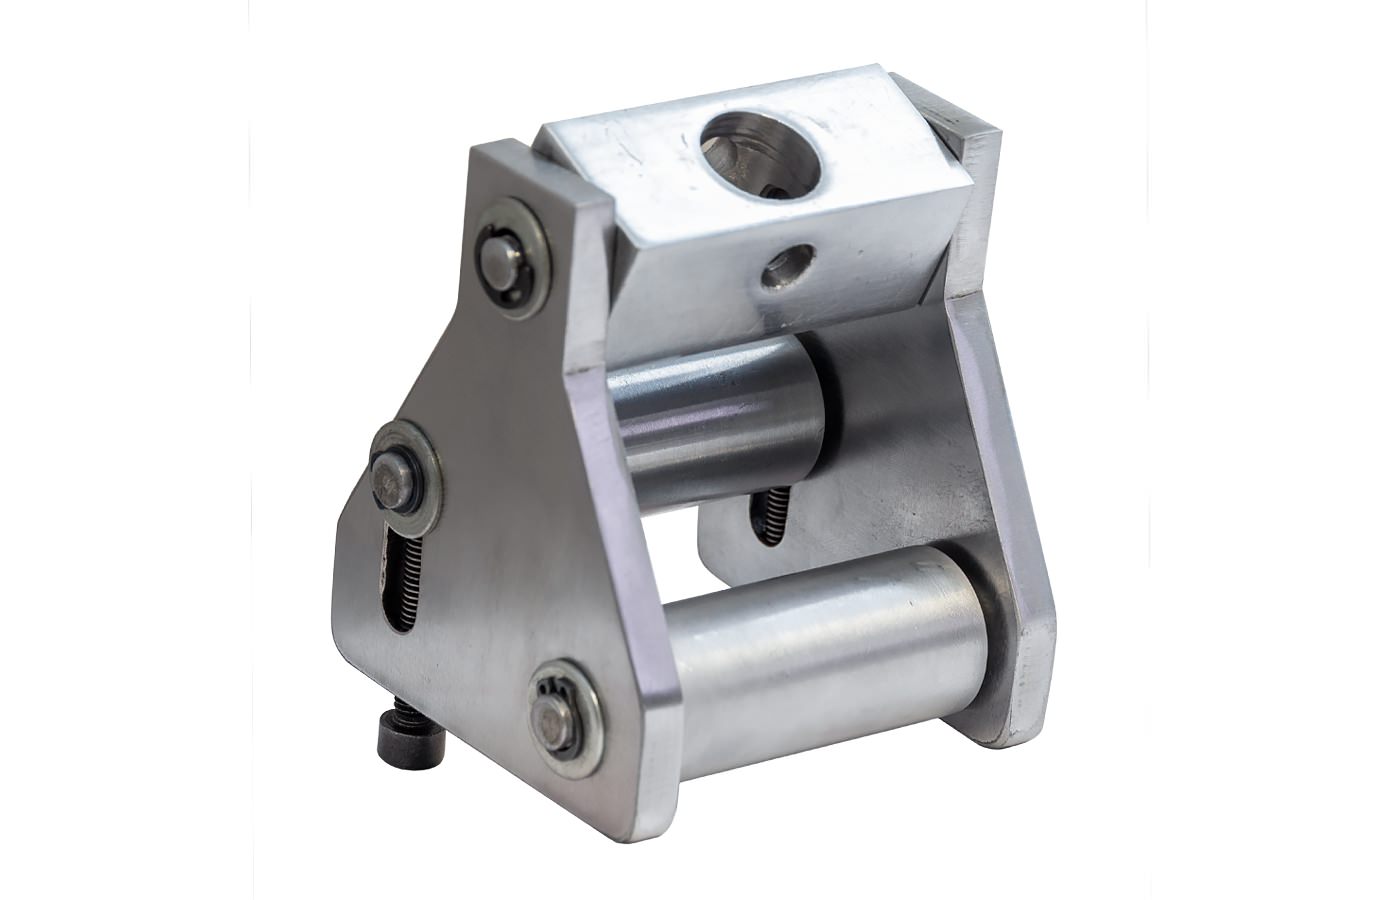 Roller clamp for testing tapes (up to 5 kN)